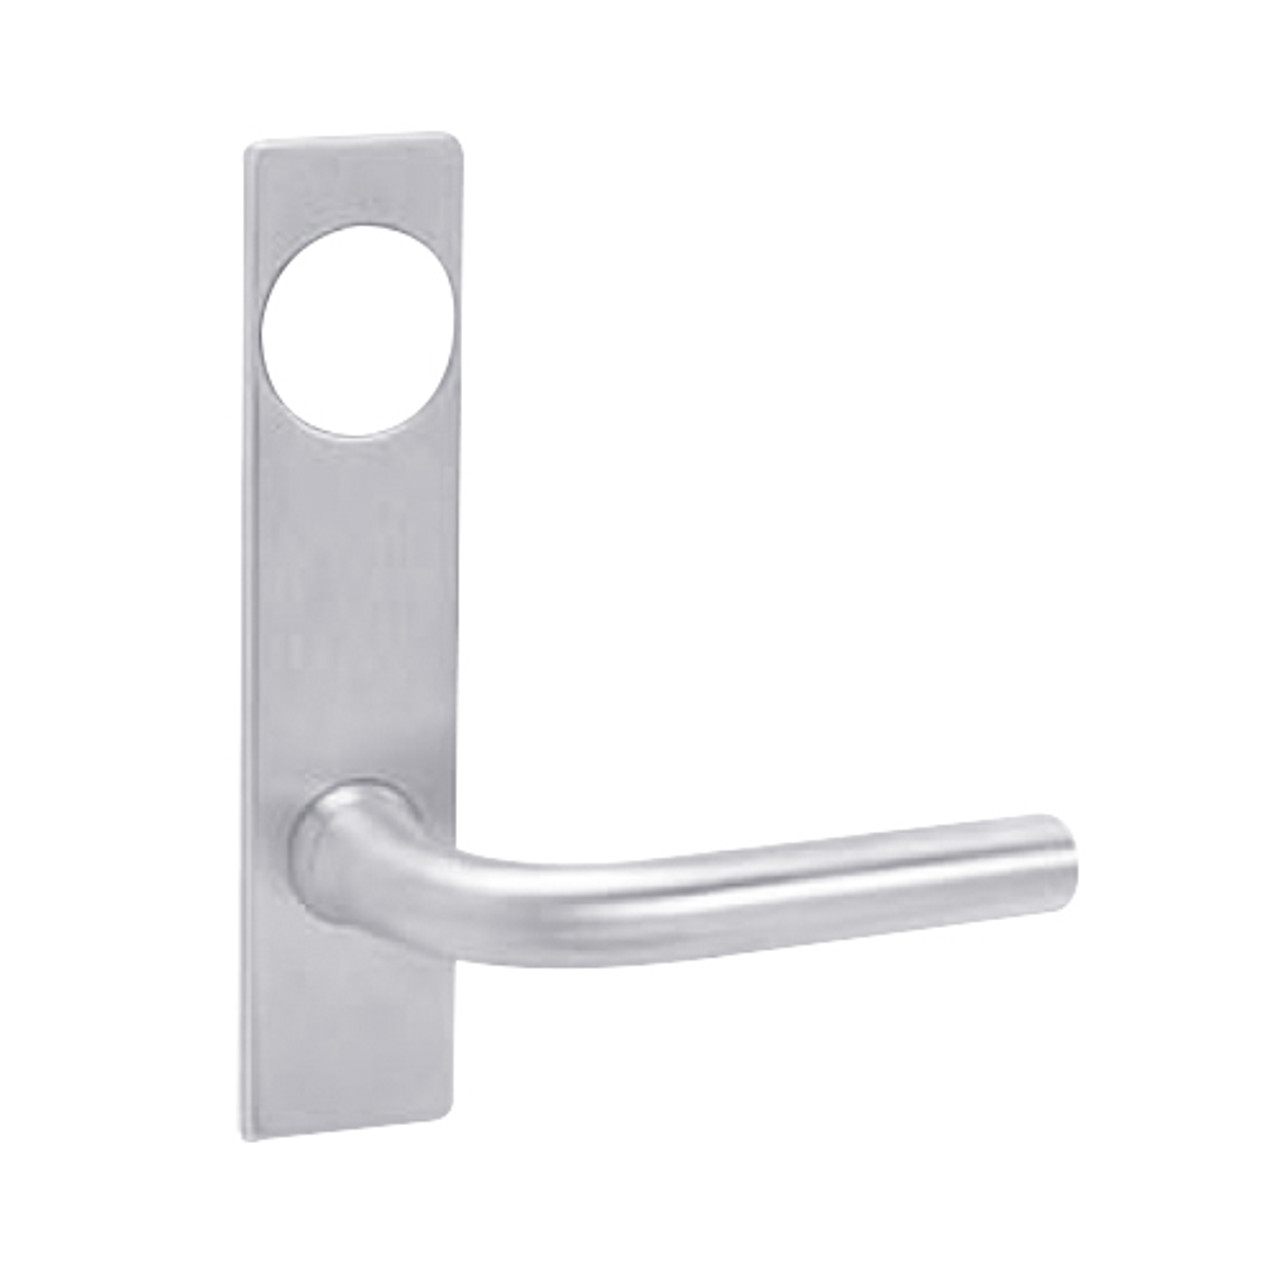 ML2052-RWP-625-CL6 Corbin Russwin ML2000 Series IC 6-Pin Less Core Mortise Classroom Intruder Locksets with Regis Lever in Bright Chrome